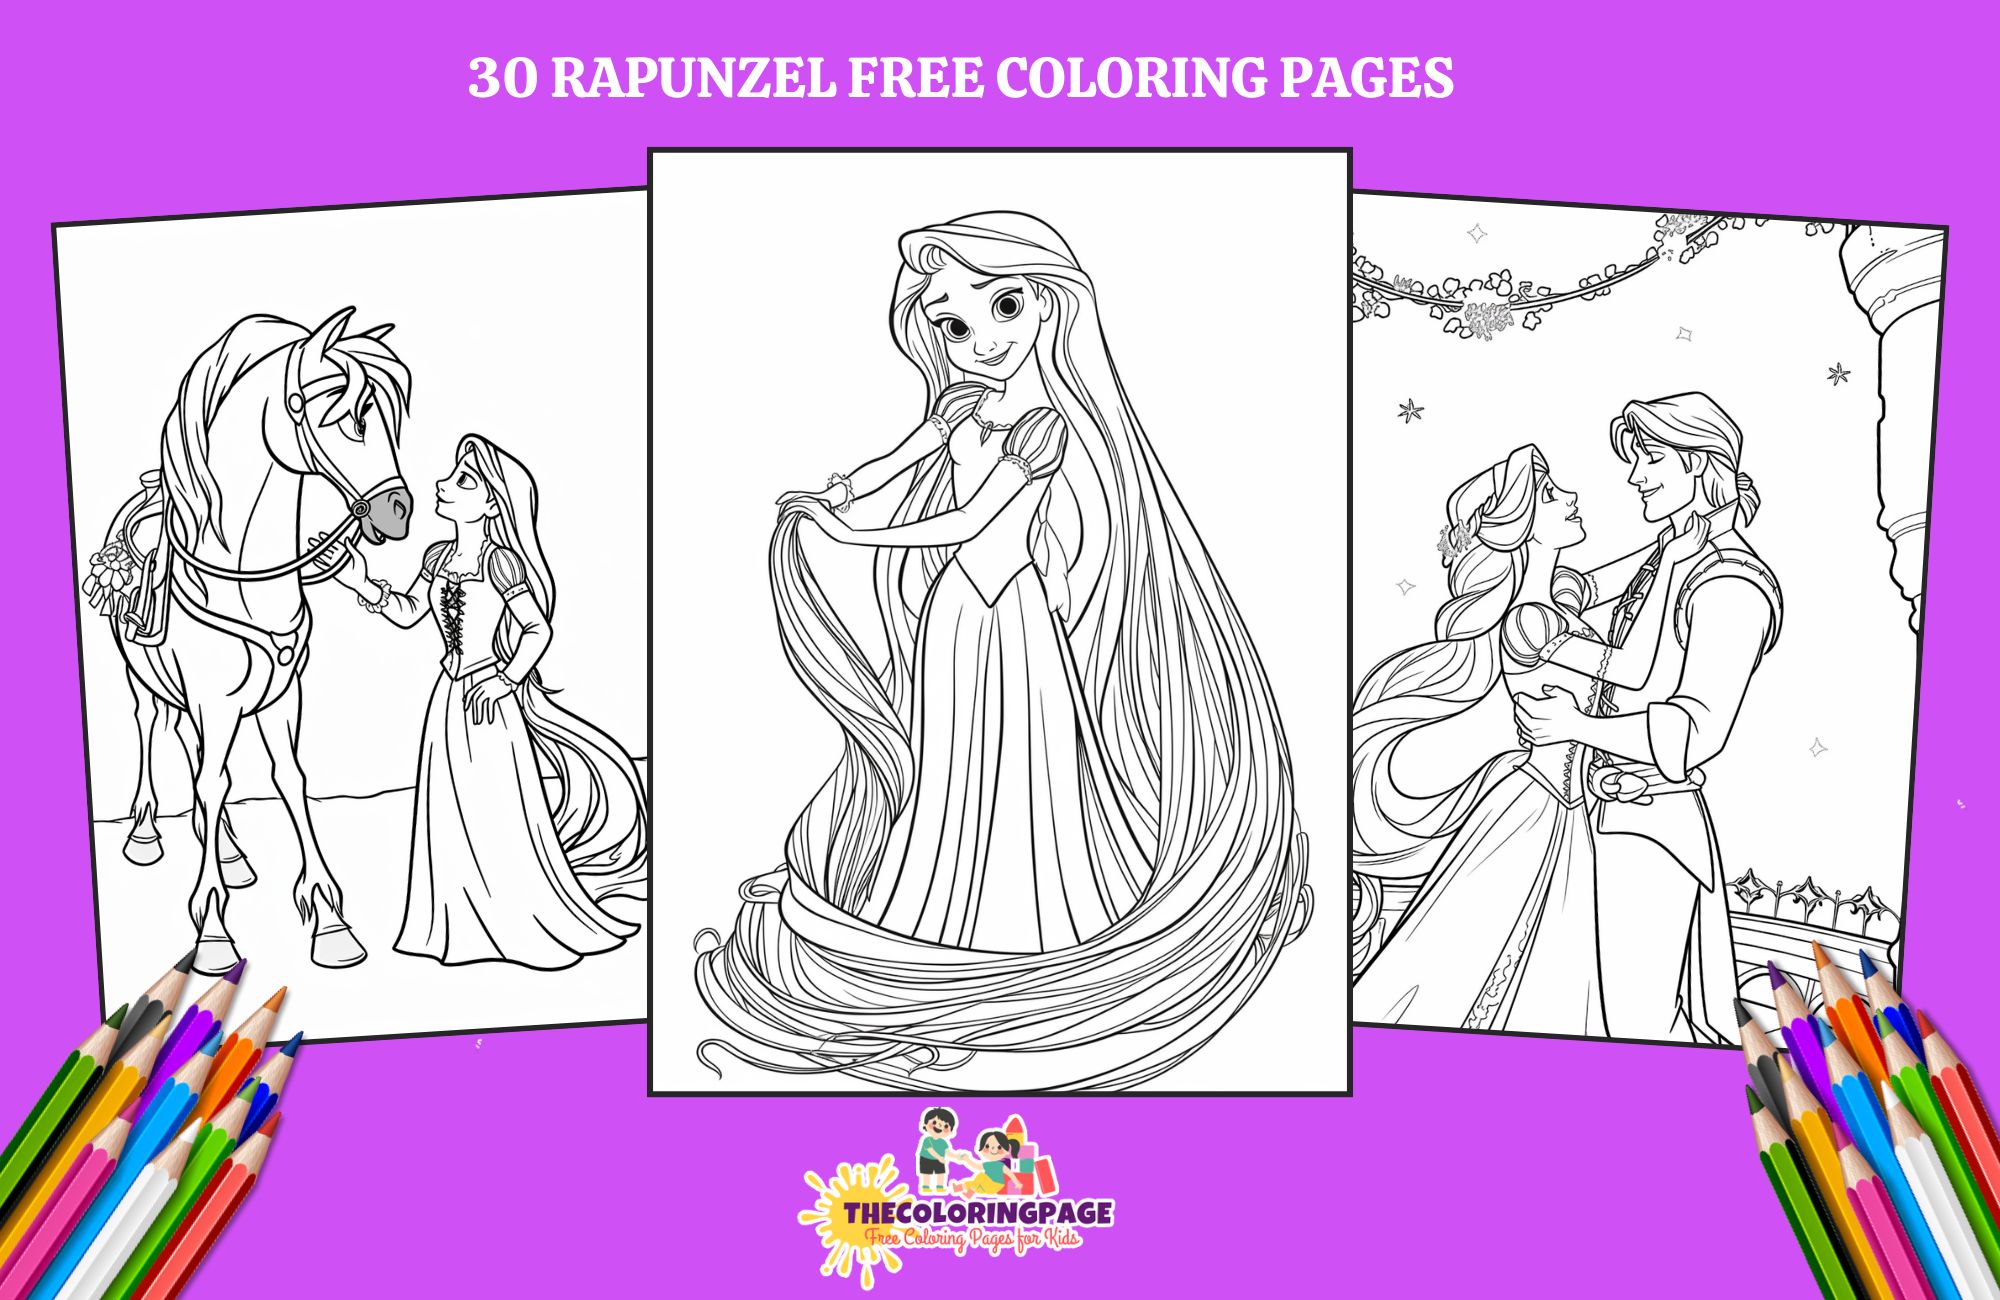 30 Free Rapunzel Coloring Pages – Perfect for Kids